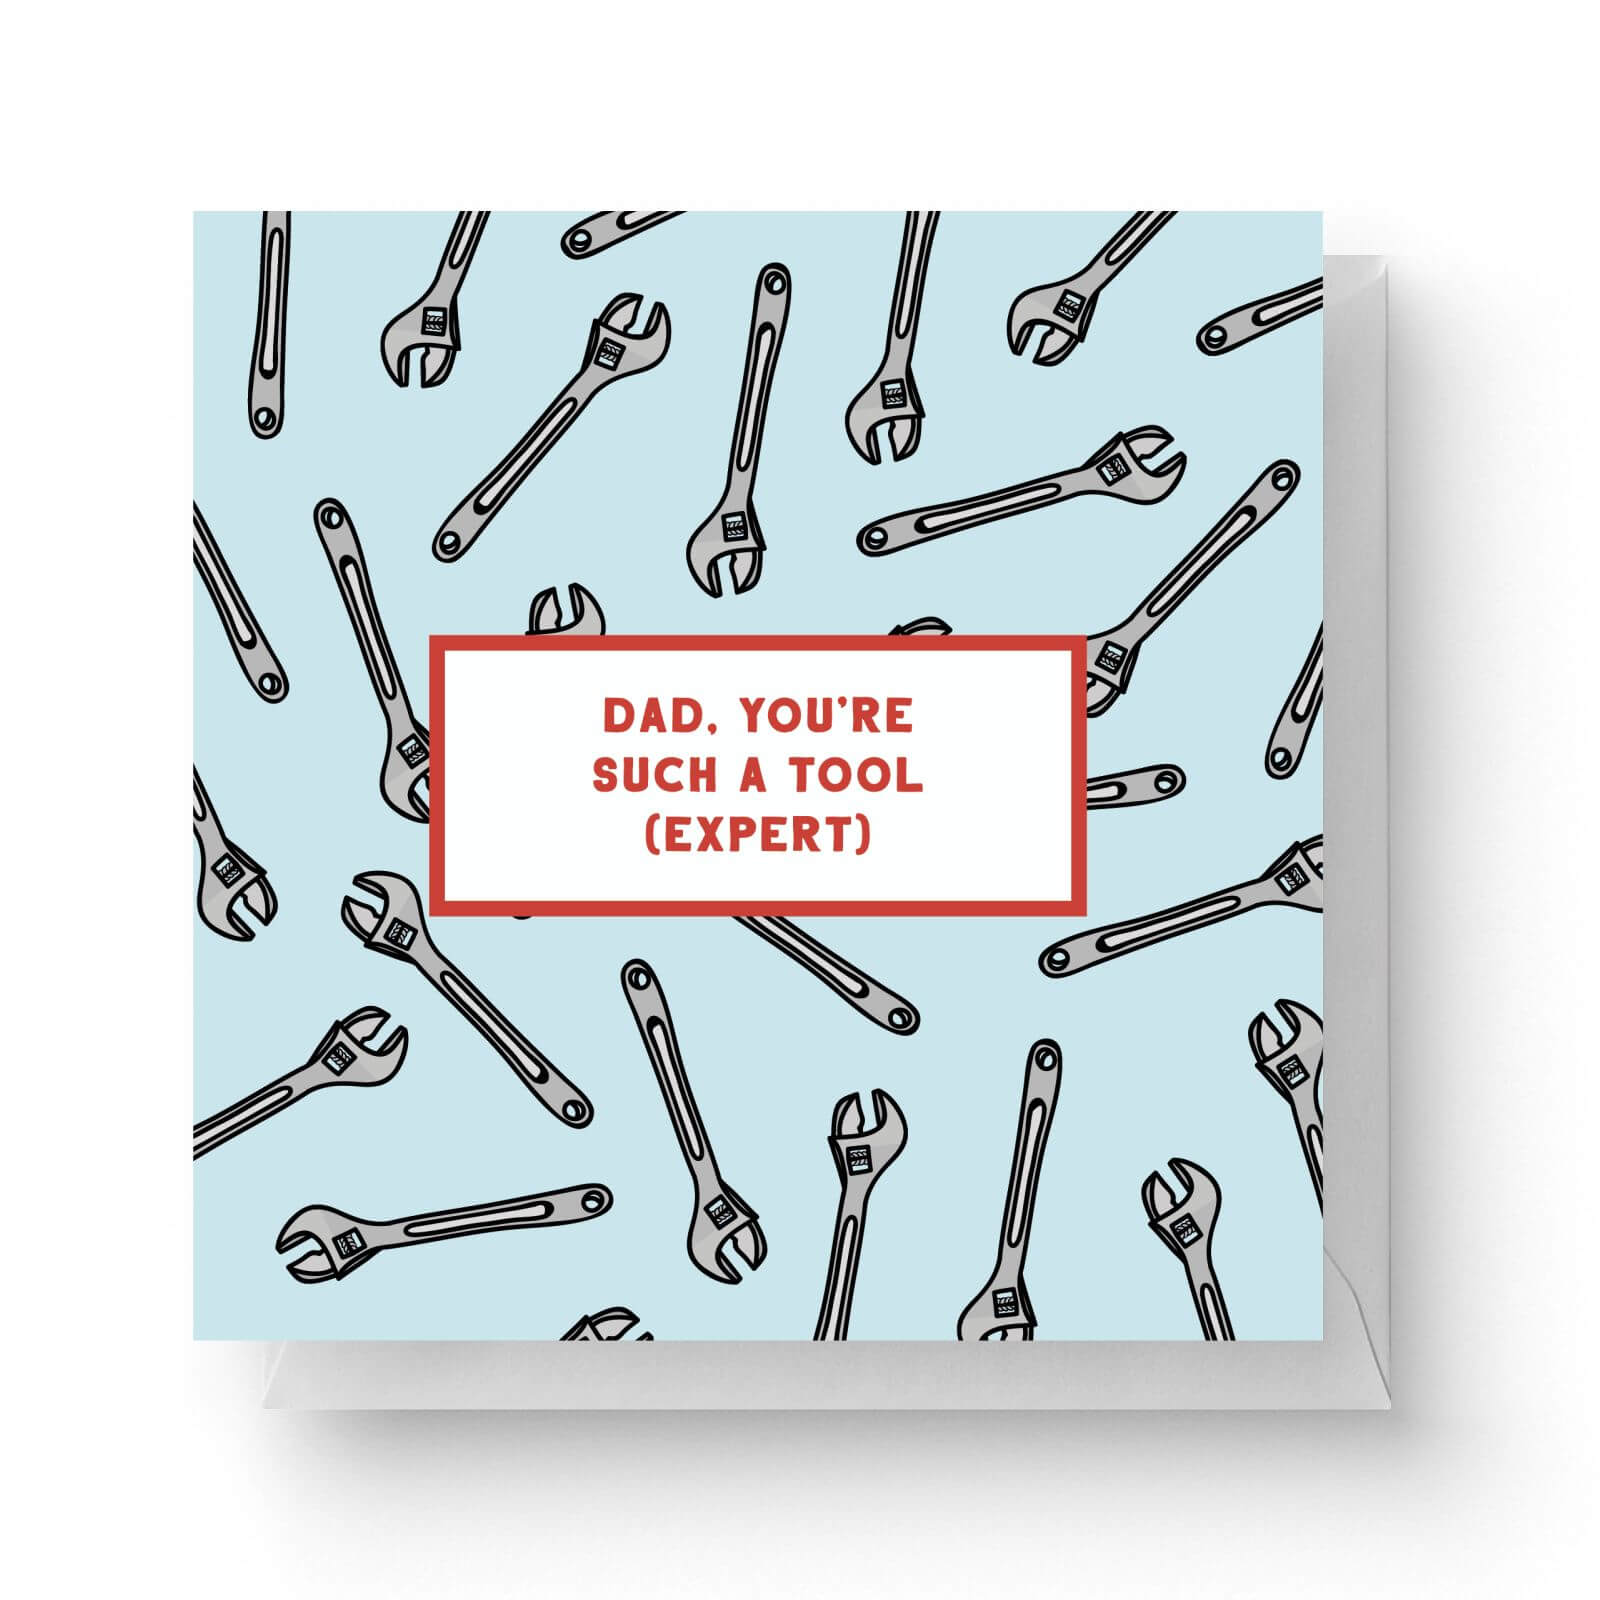 Image of Dad, You're Such A Tool (Expert) Square Greetings Card (14.8cm x 14.8cm)